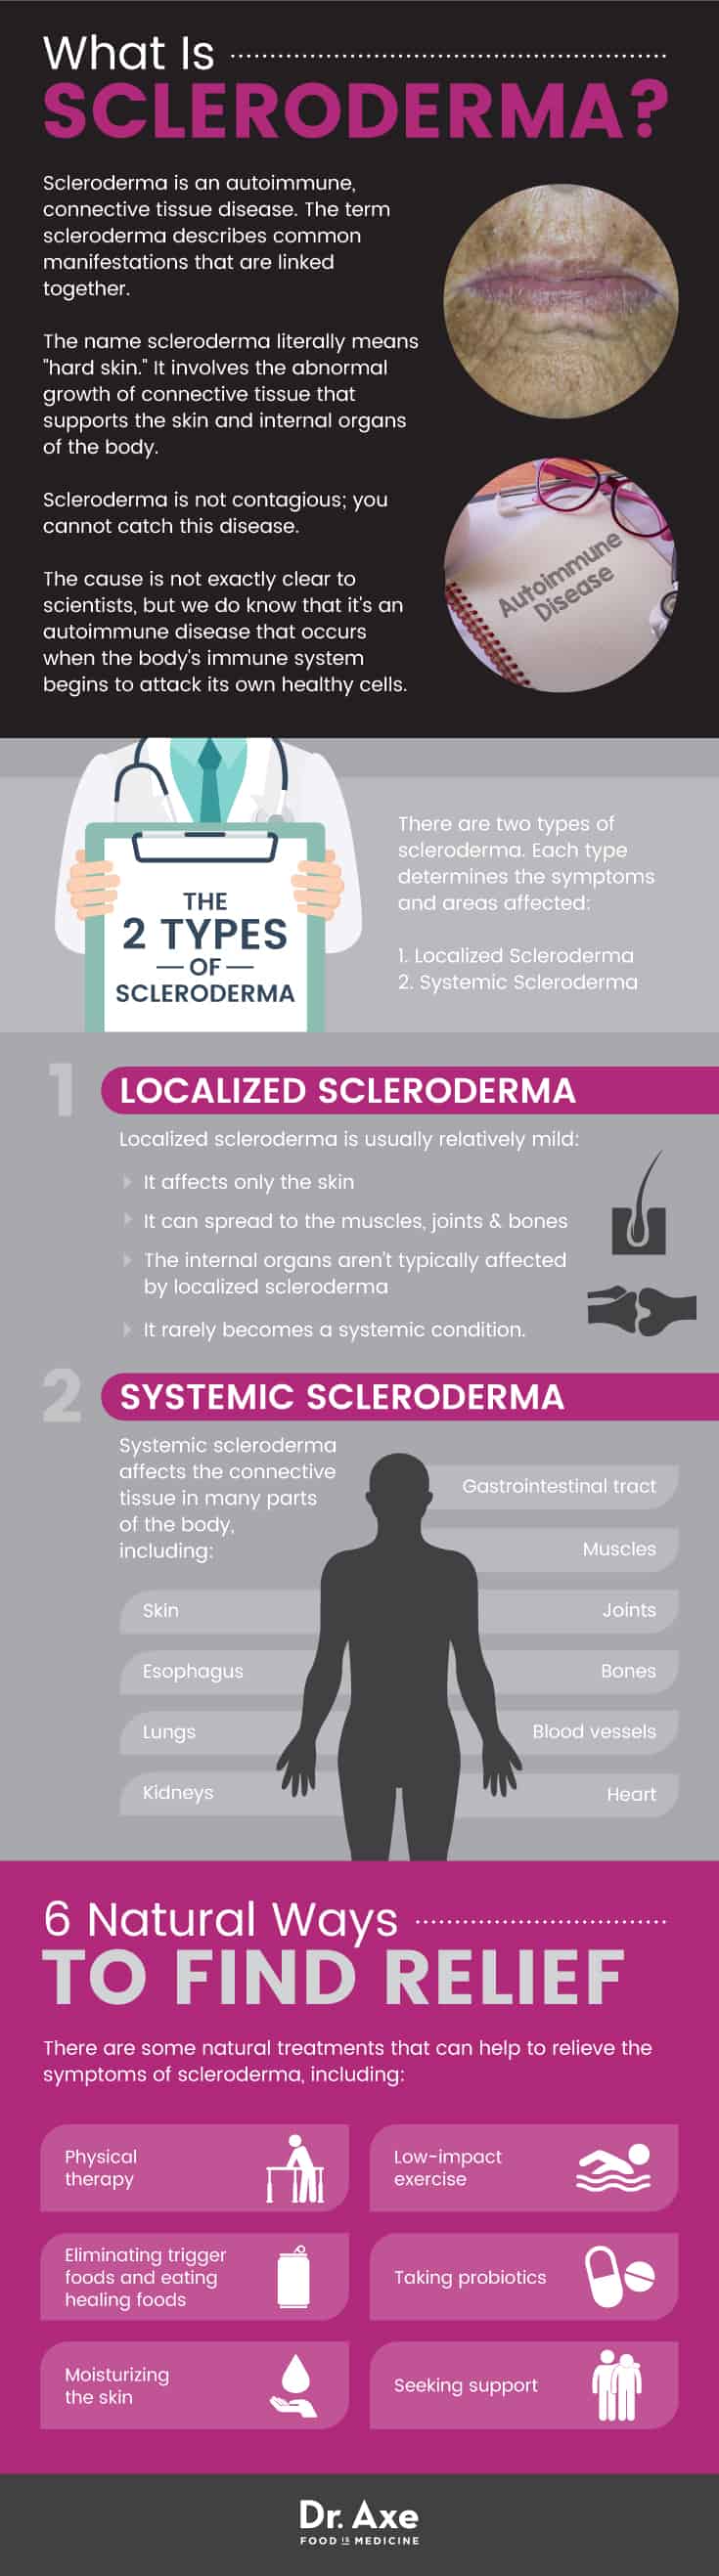 What is scleroderma? - Dr. Axe